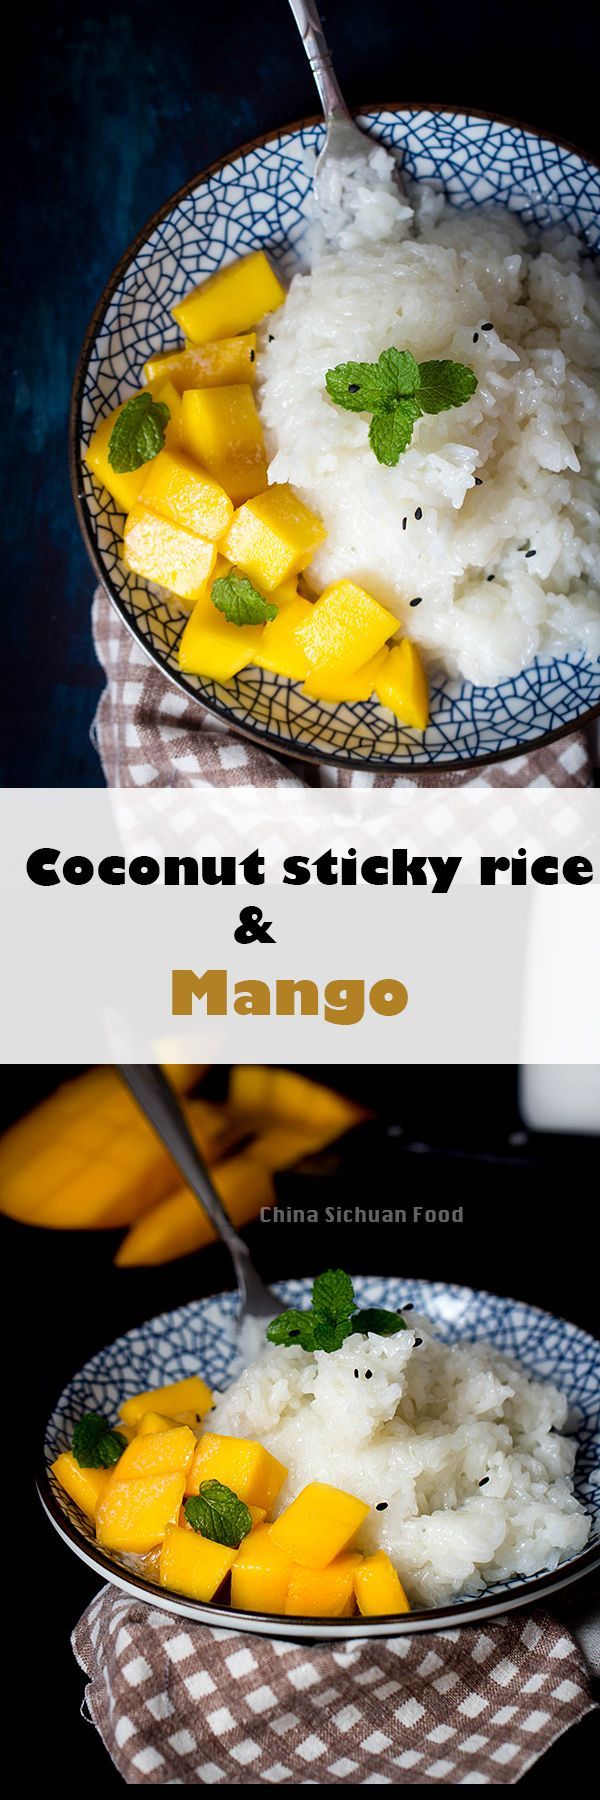 Thai Sticky Rice Recipe with Mango. This is so good in our favorite Thai restaurant, so I am intrigued.